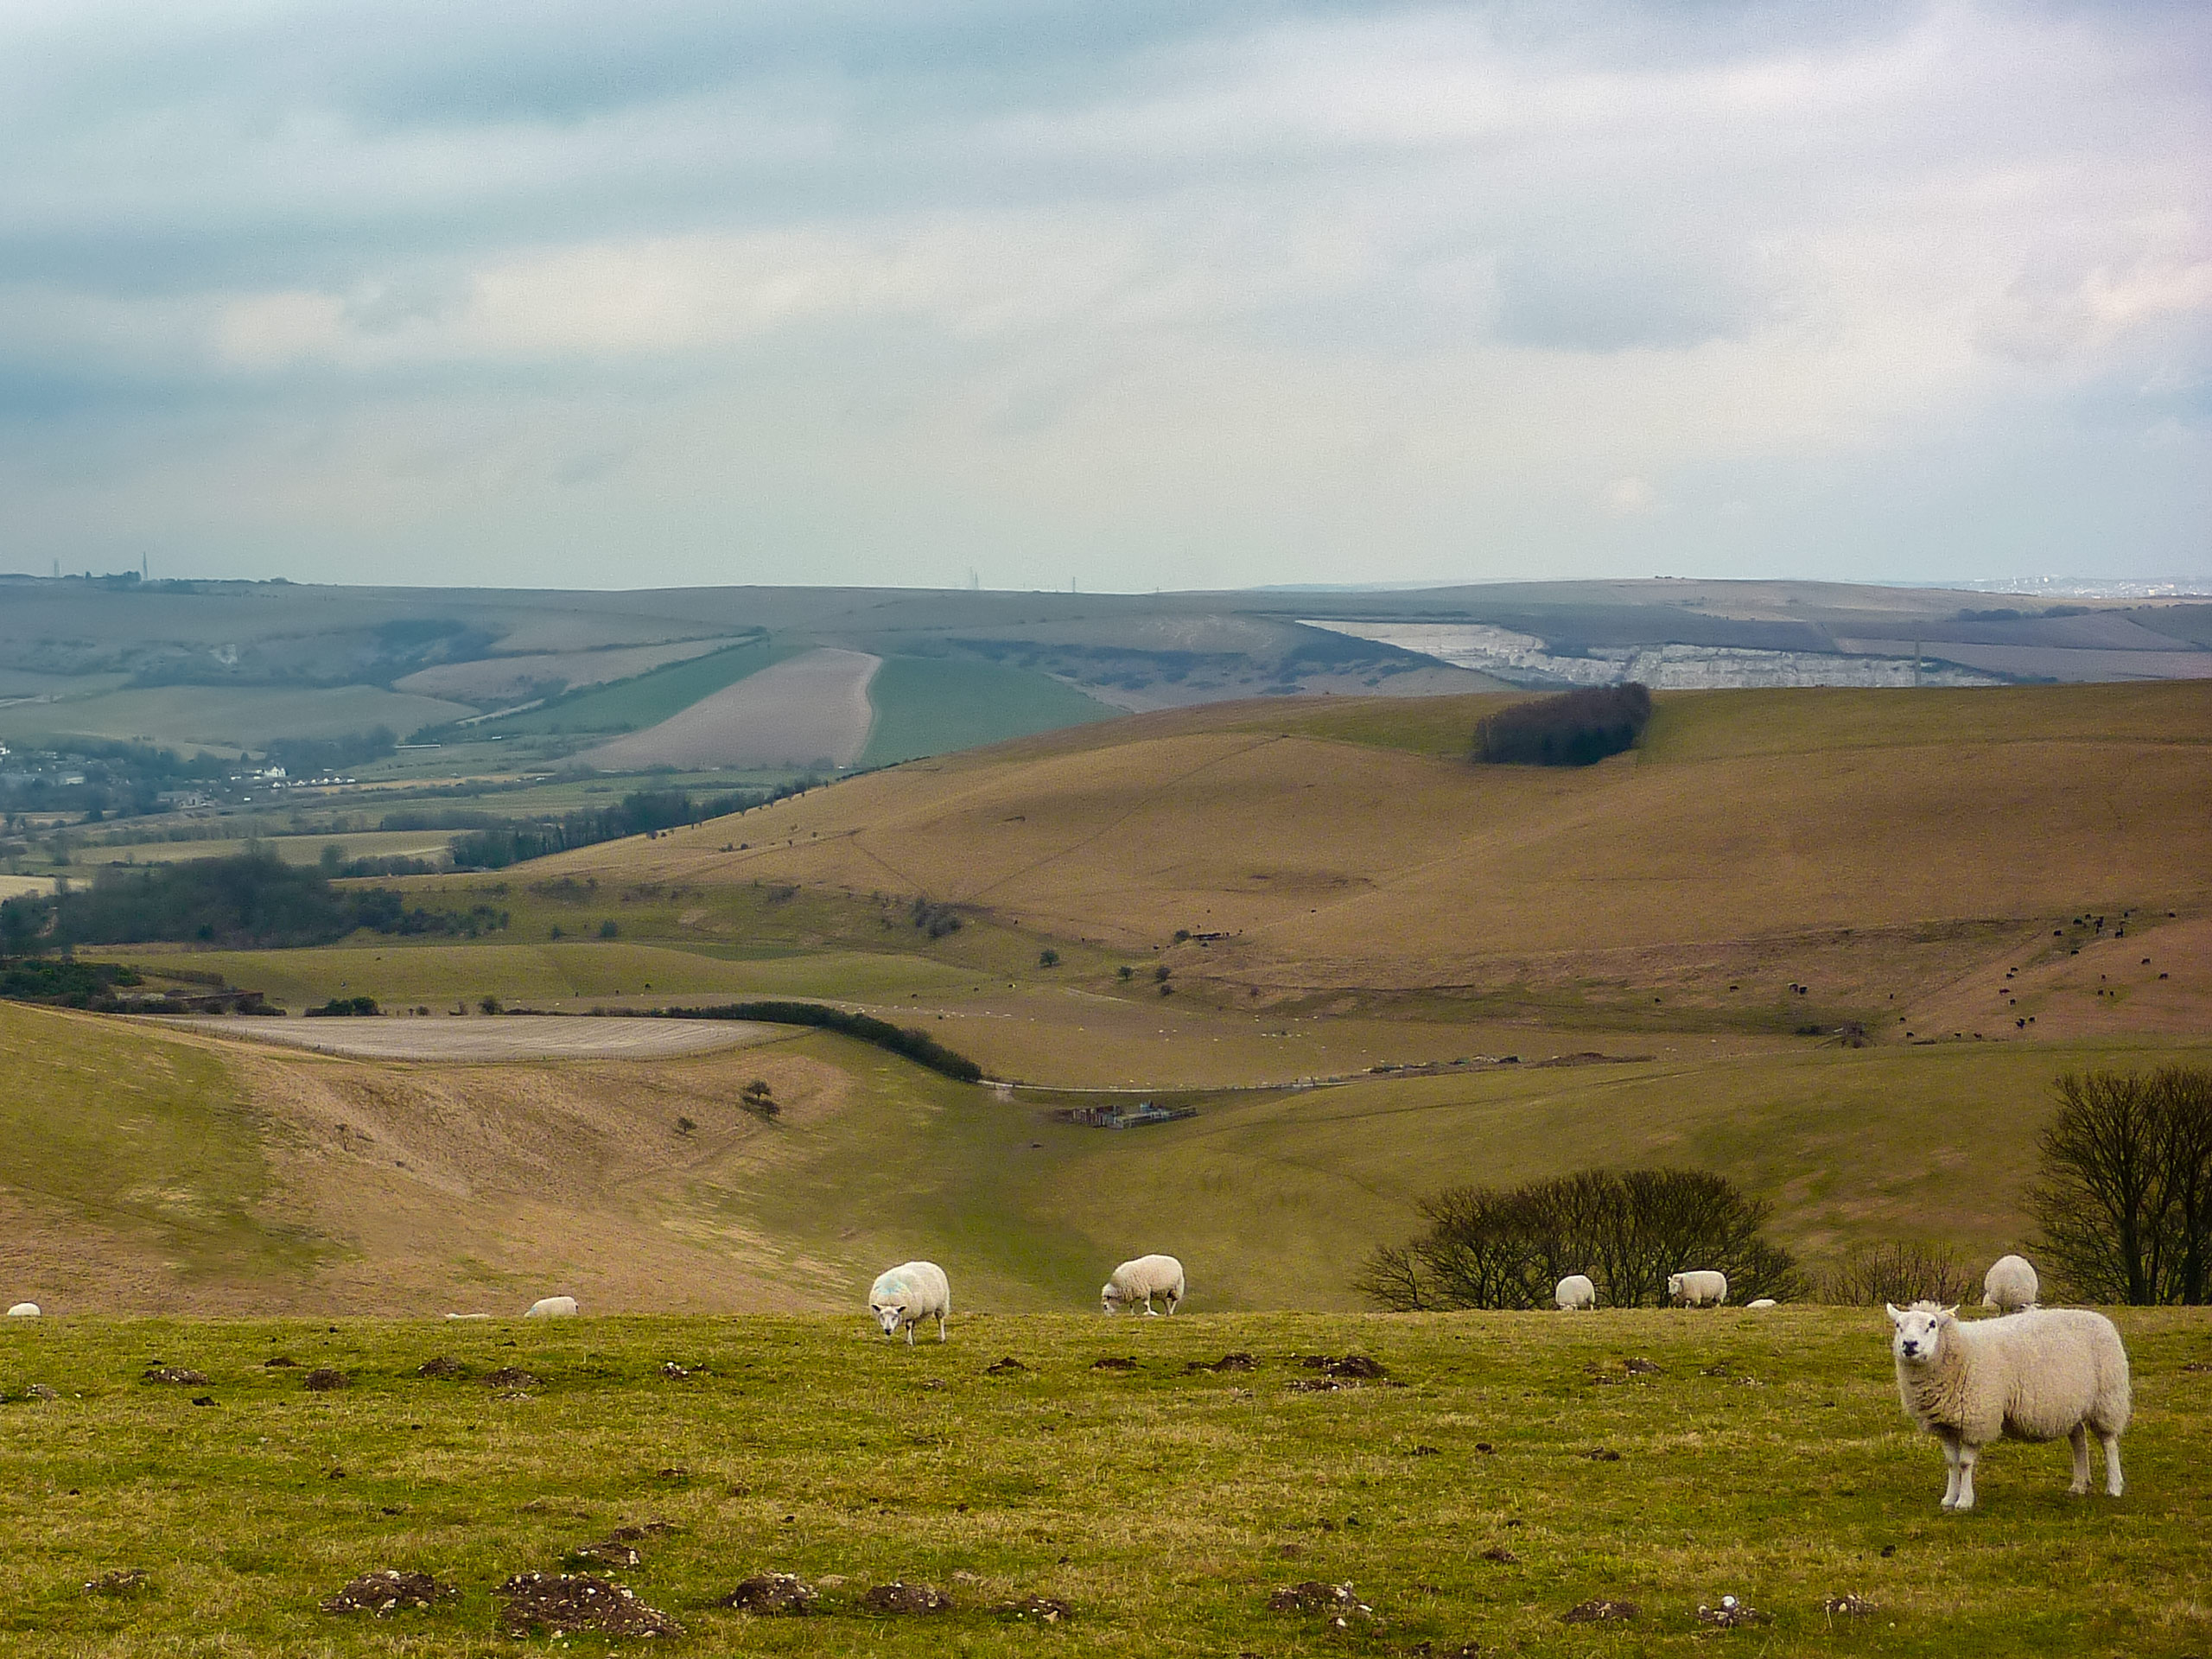 Steyning Bowl and sheep grazing along the hills